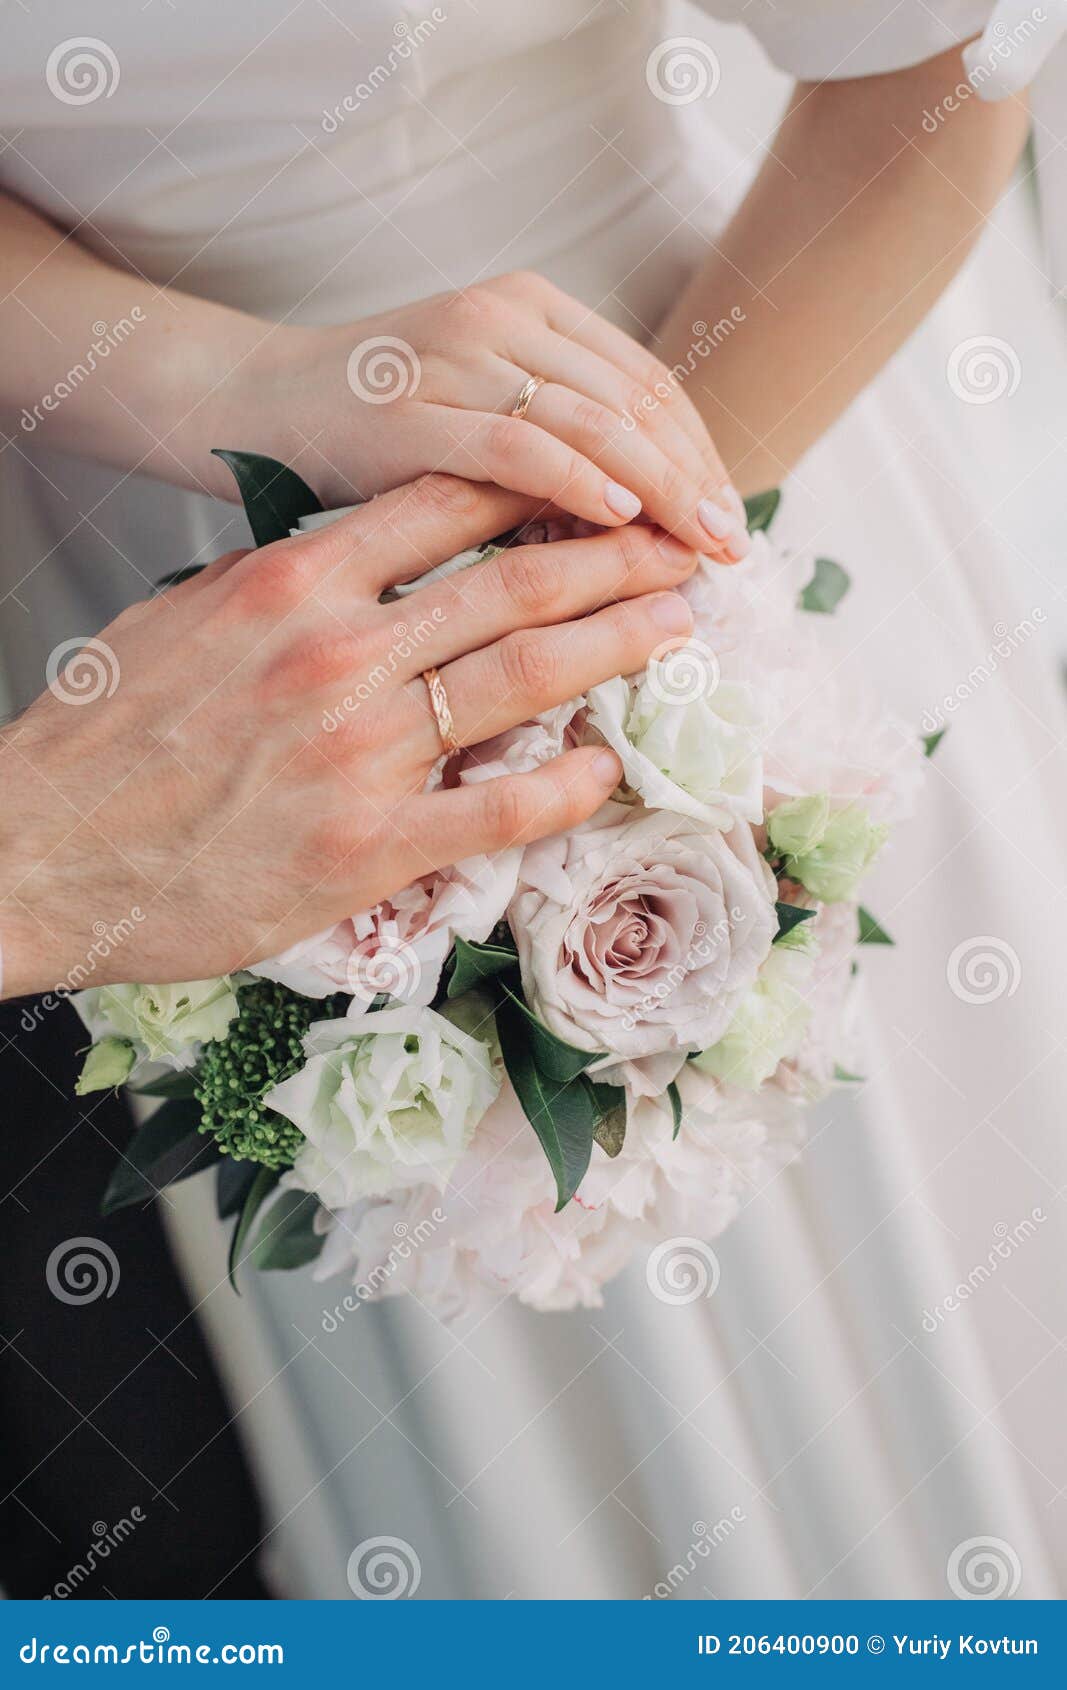 Hands Bride Groom Together Tenderness Couple Love Stock Photo - Image ...